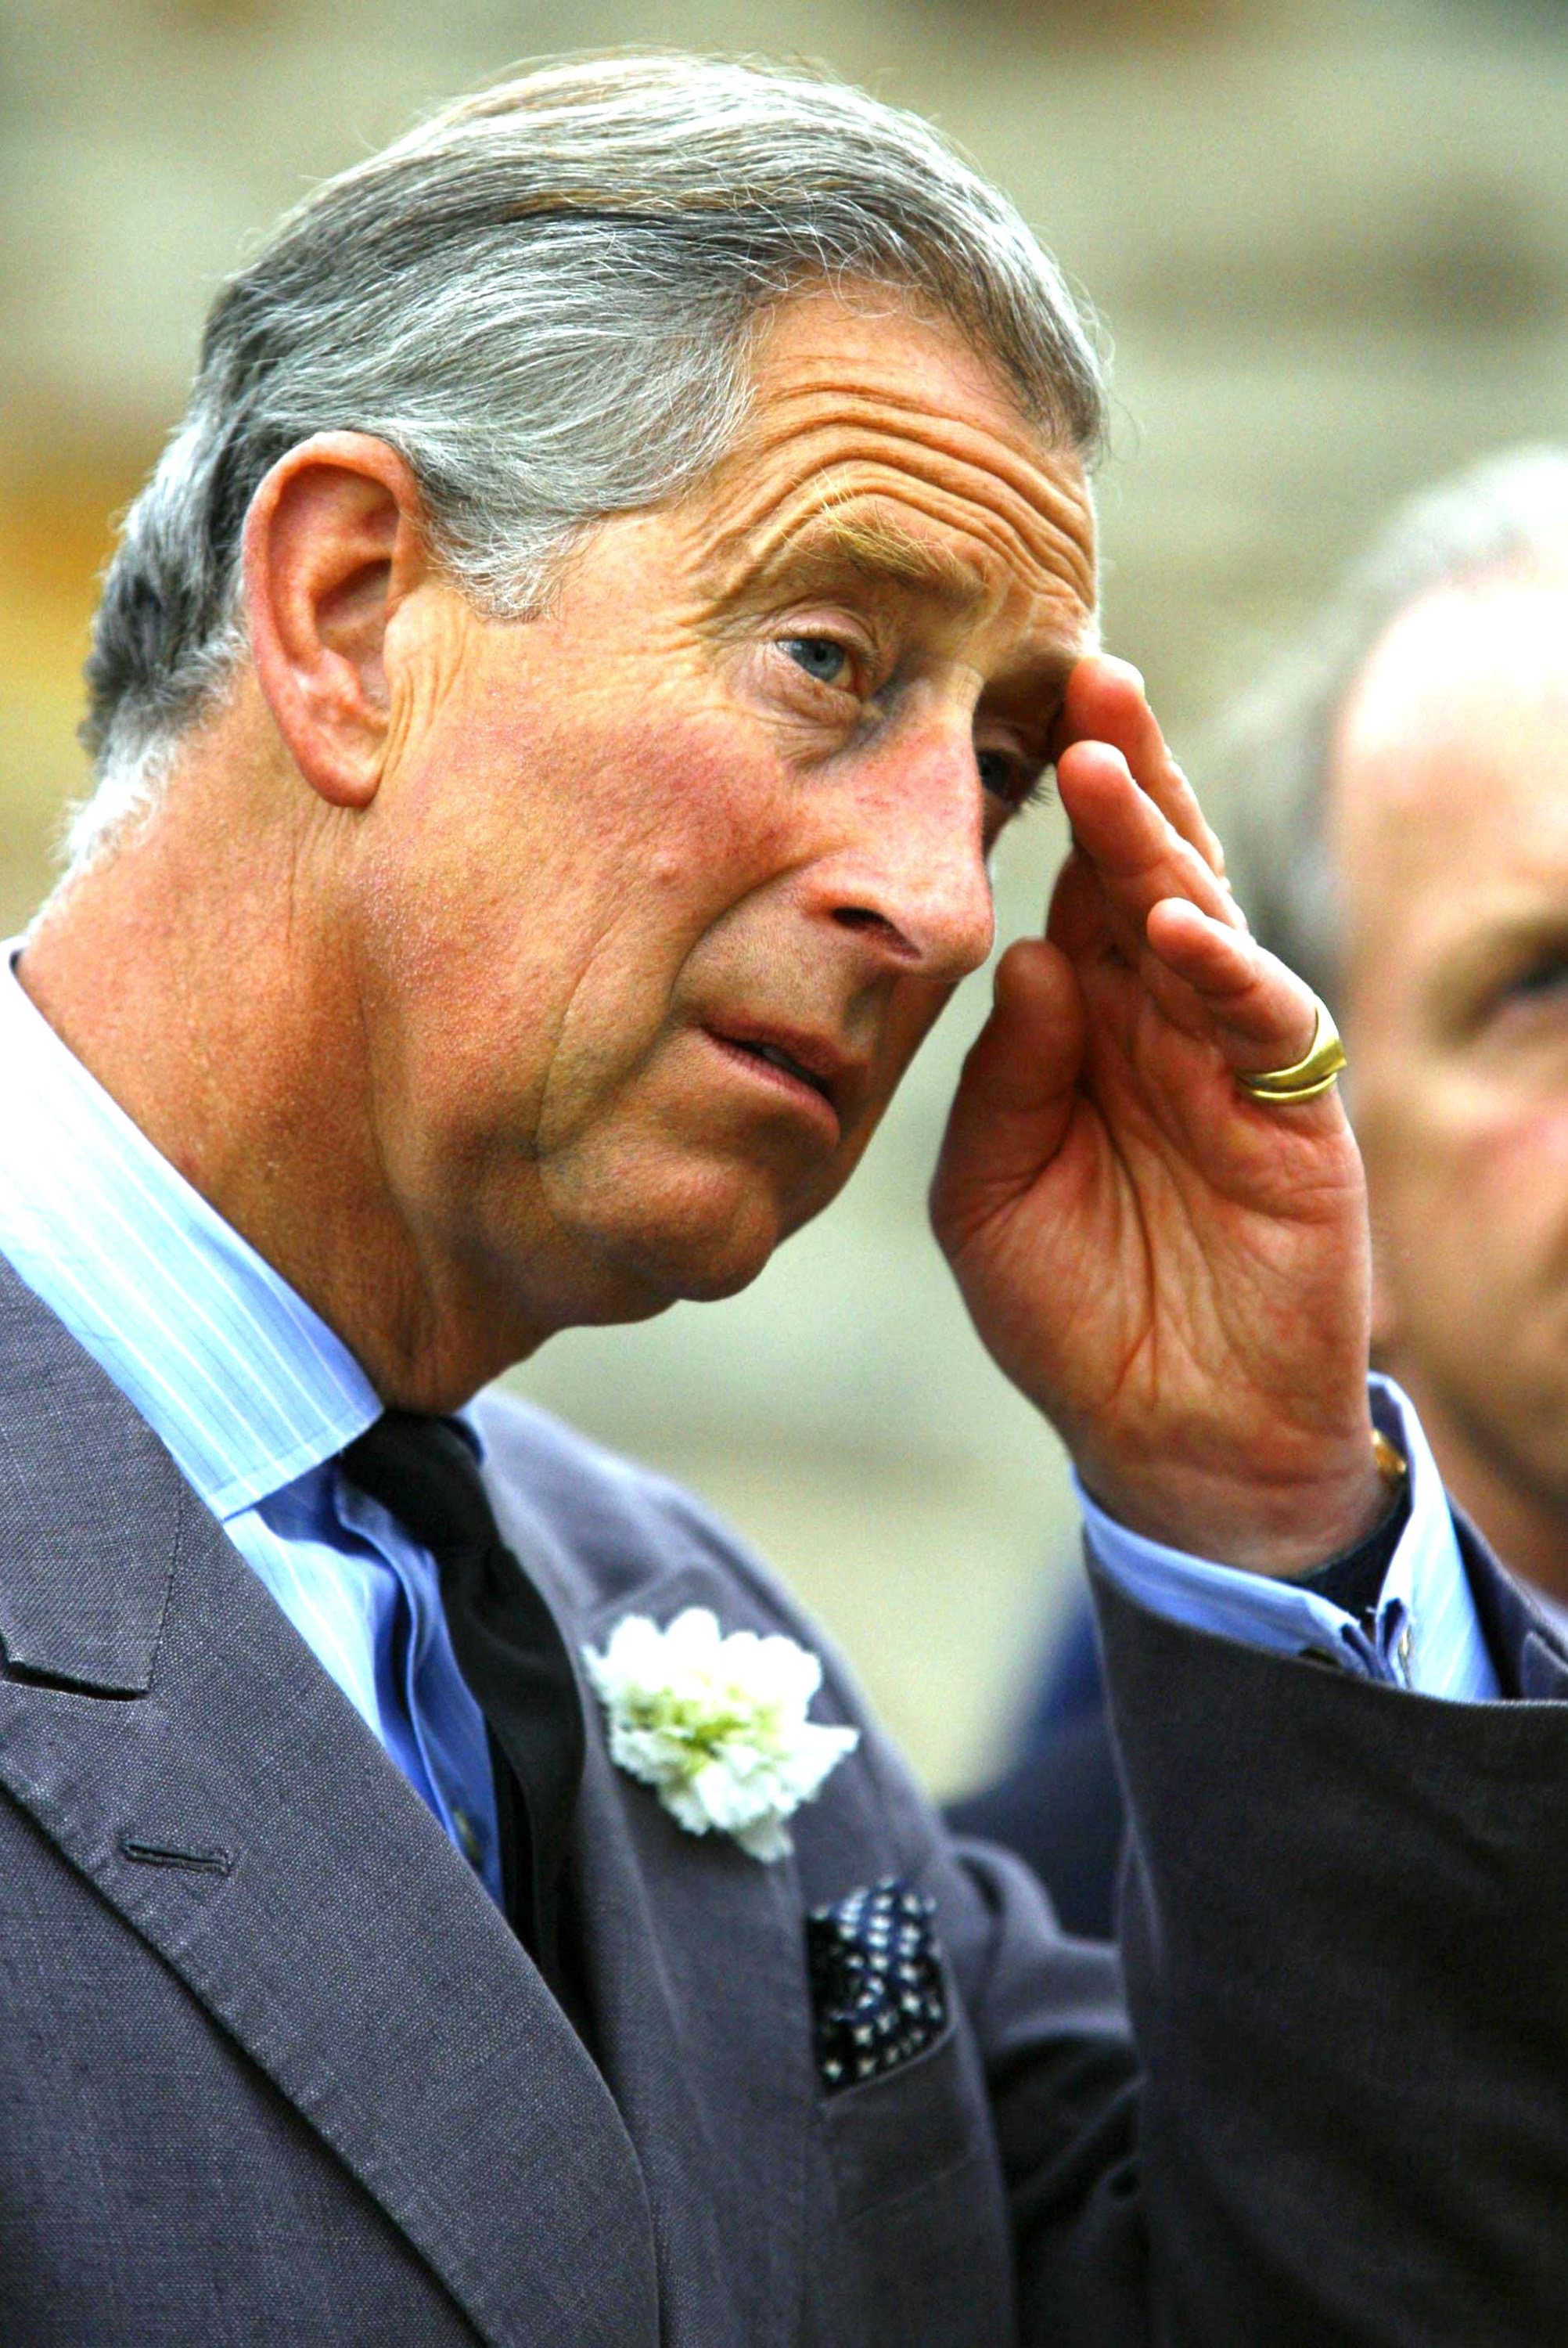 King Charles III visits a housing development in Truro which has been built on land previously owned by The Duchy of Cornwall on June 13, 2006. | Source: Getty Images